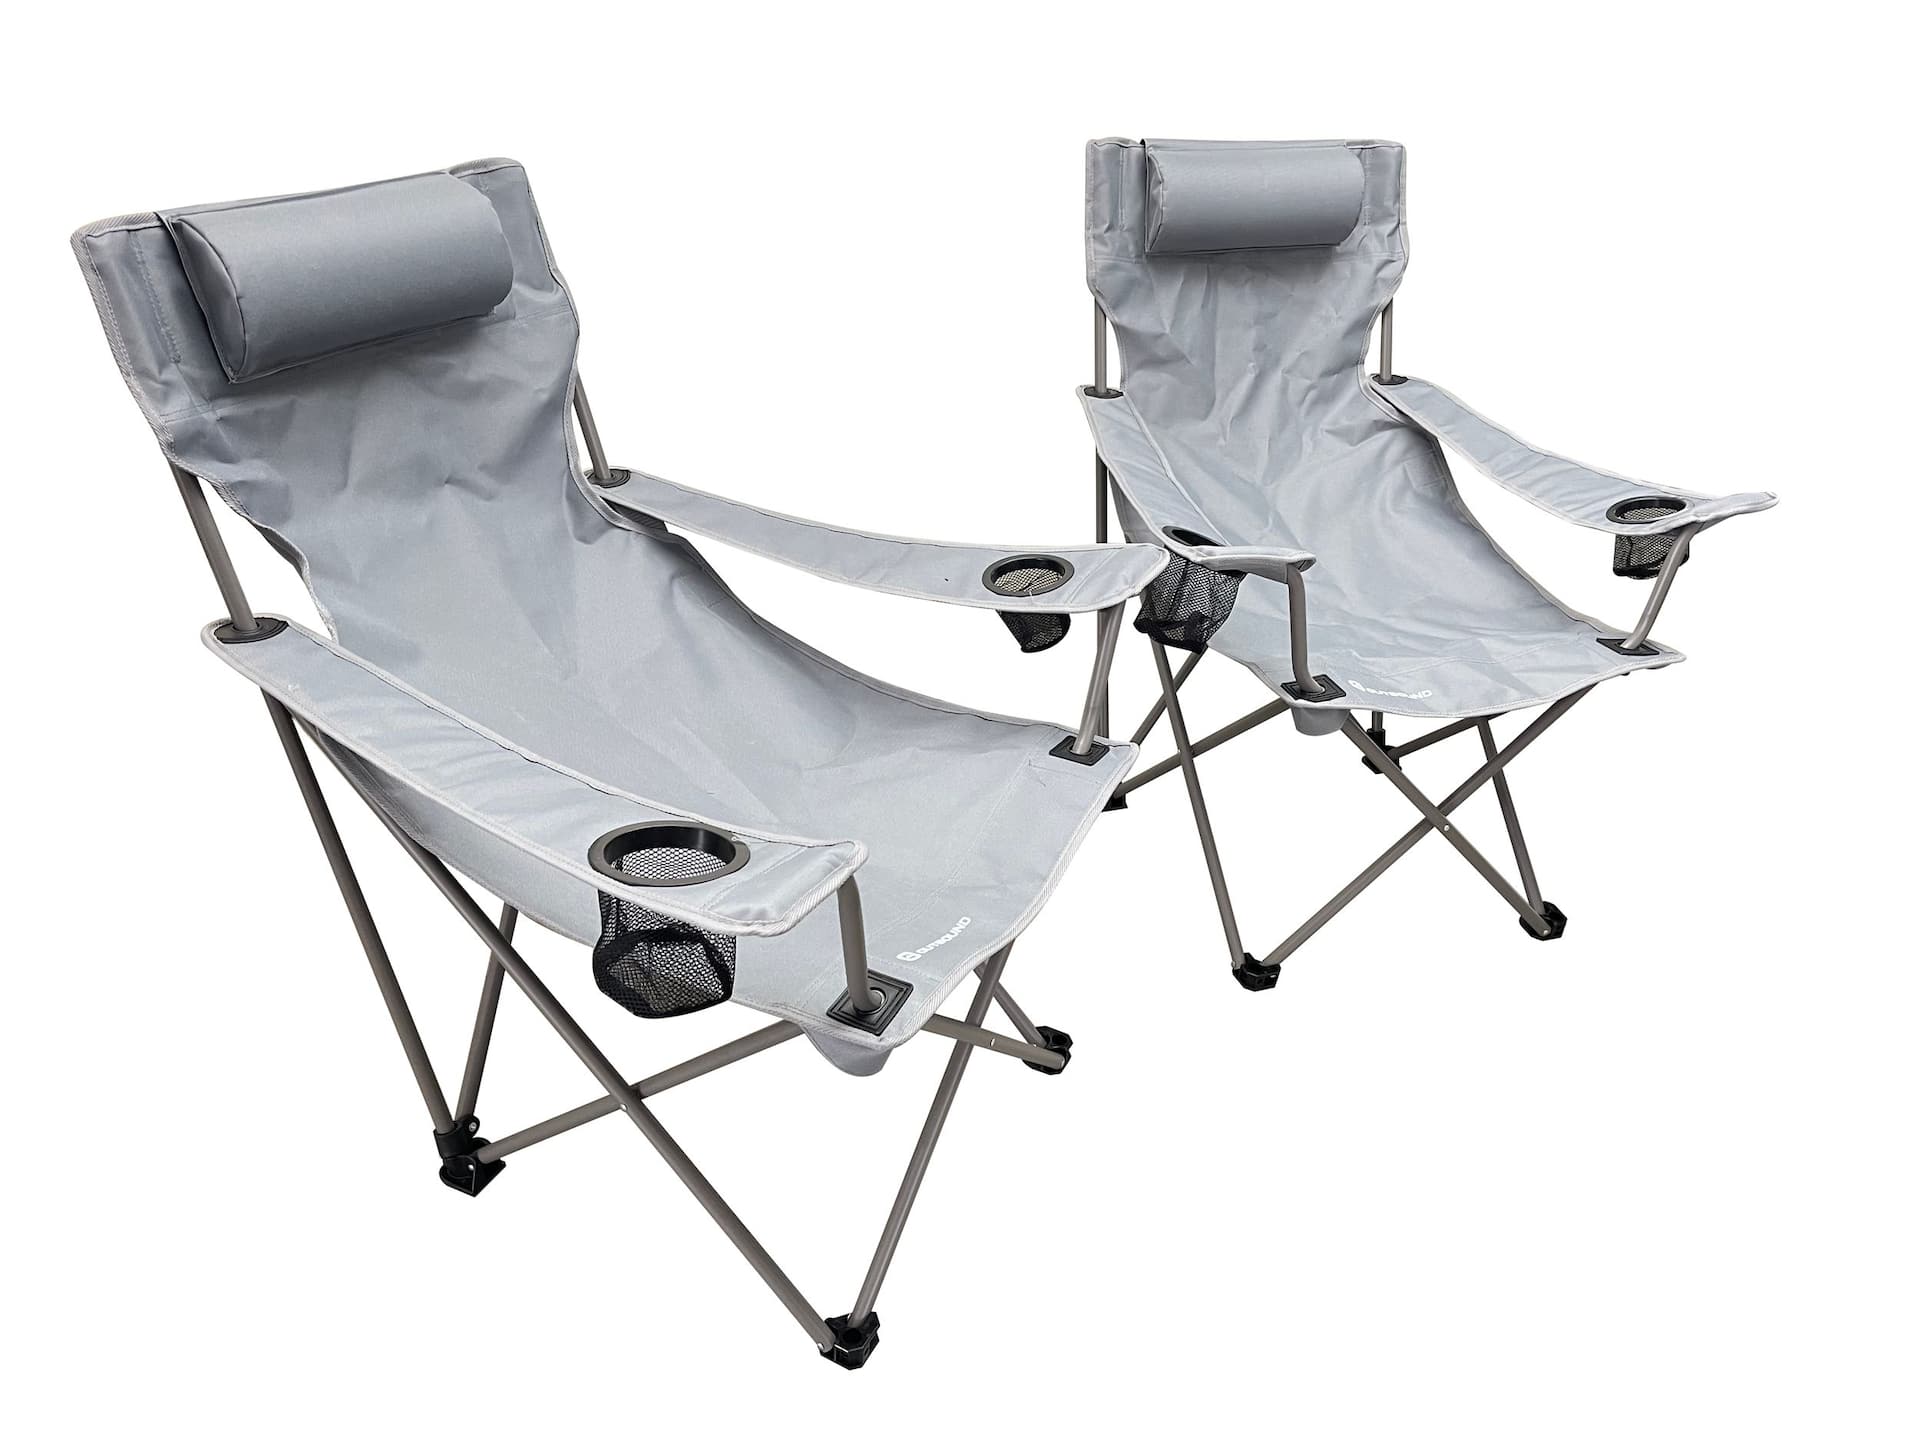 Outbound Quad-Fold Lounge Chair for Outdoor/Camping, 2-Piece, Grey